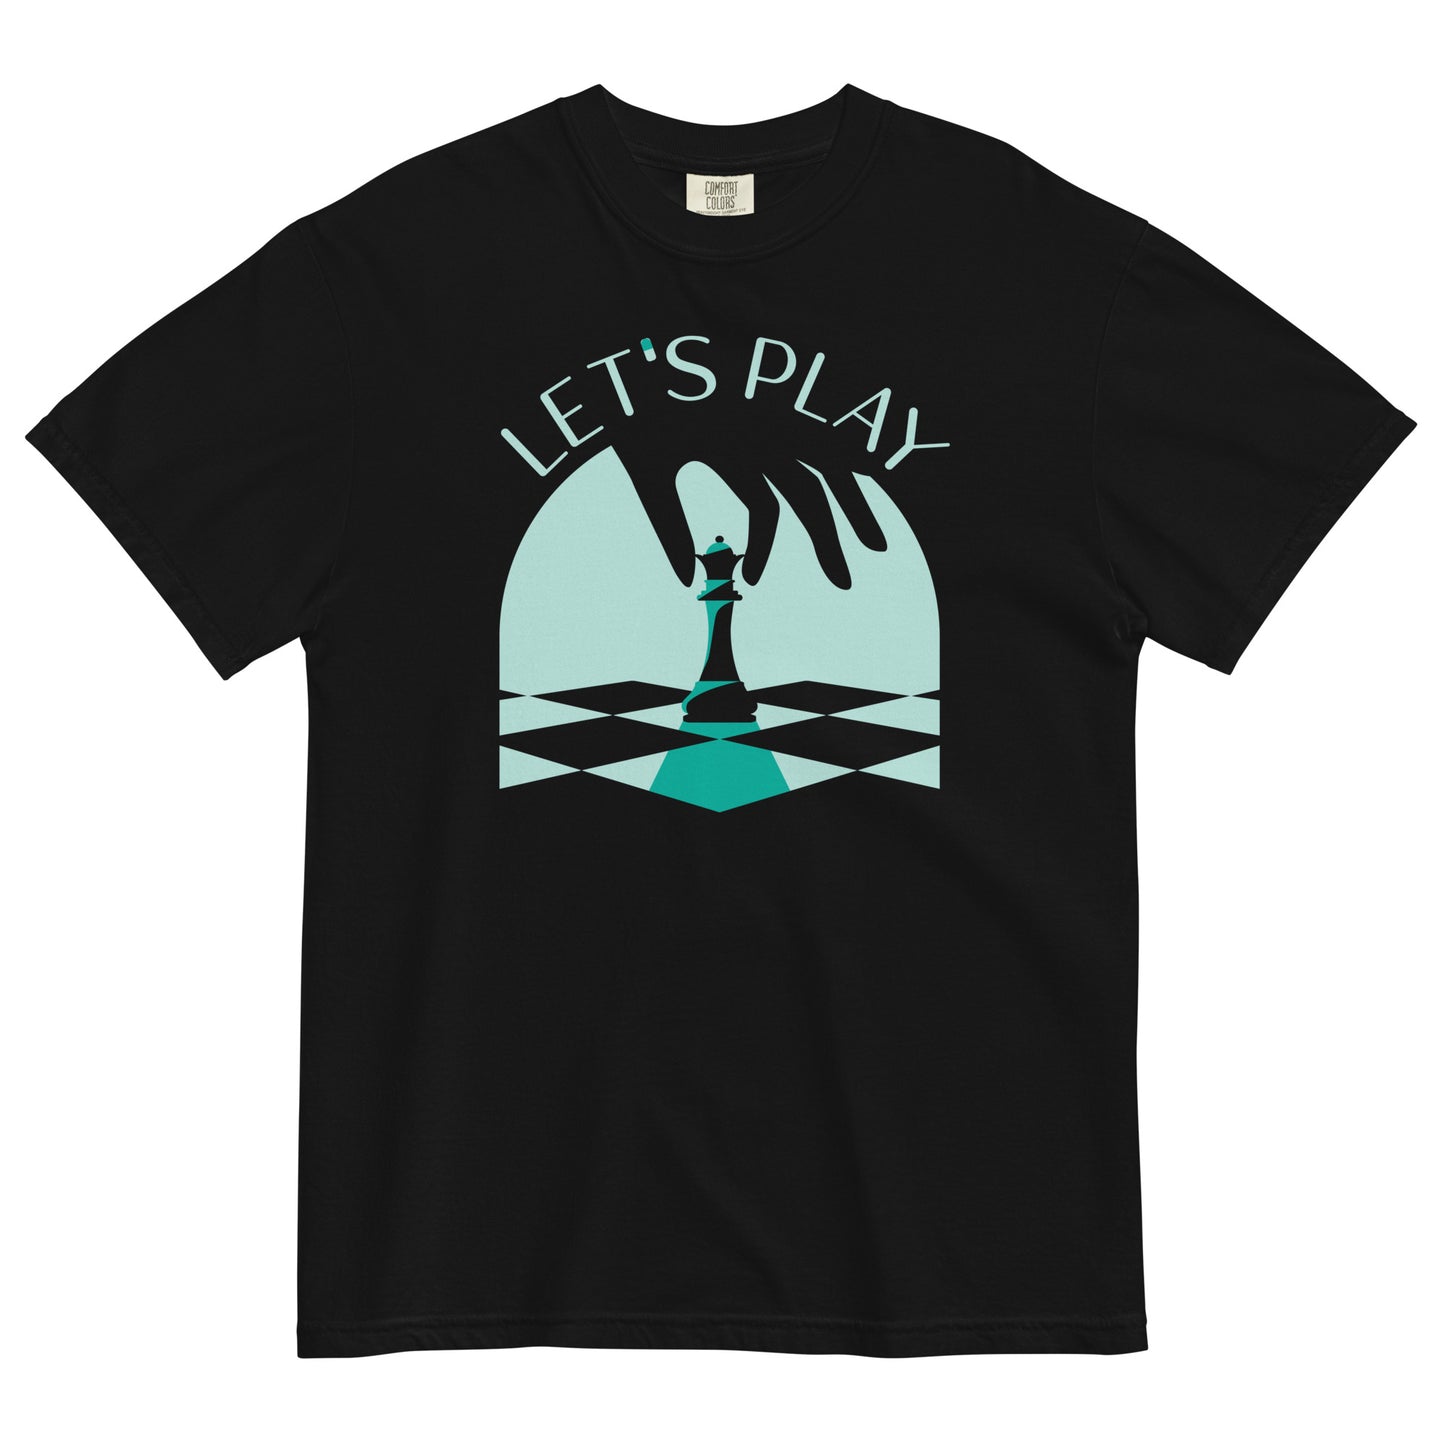 Let's Play Chess Men's Relaxed Fit Tee